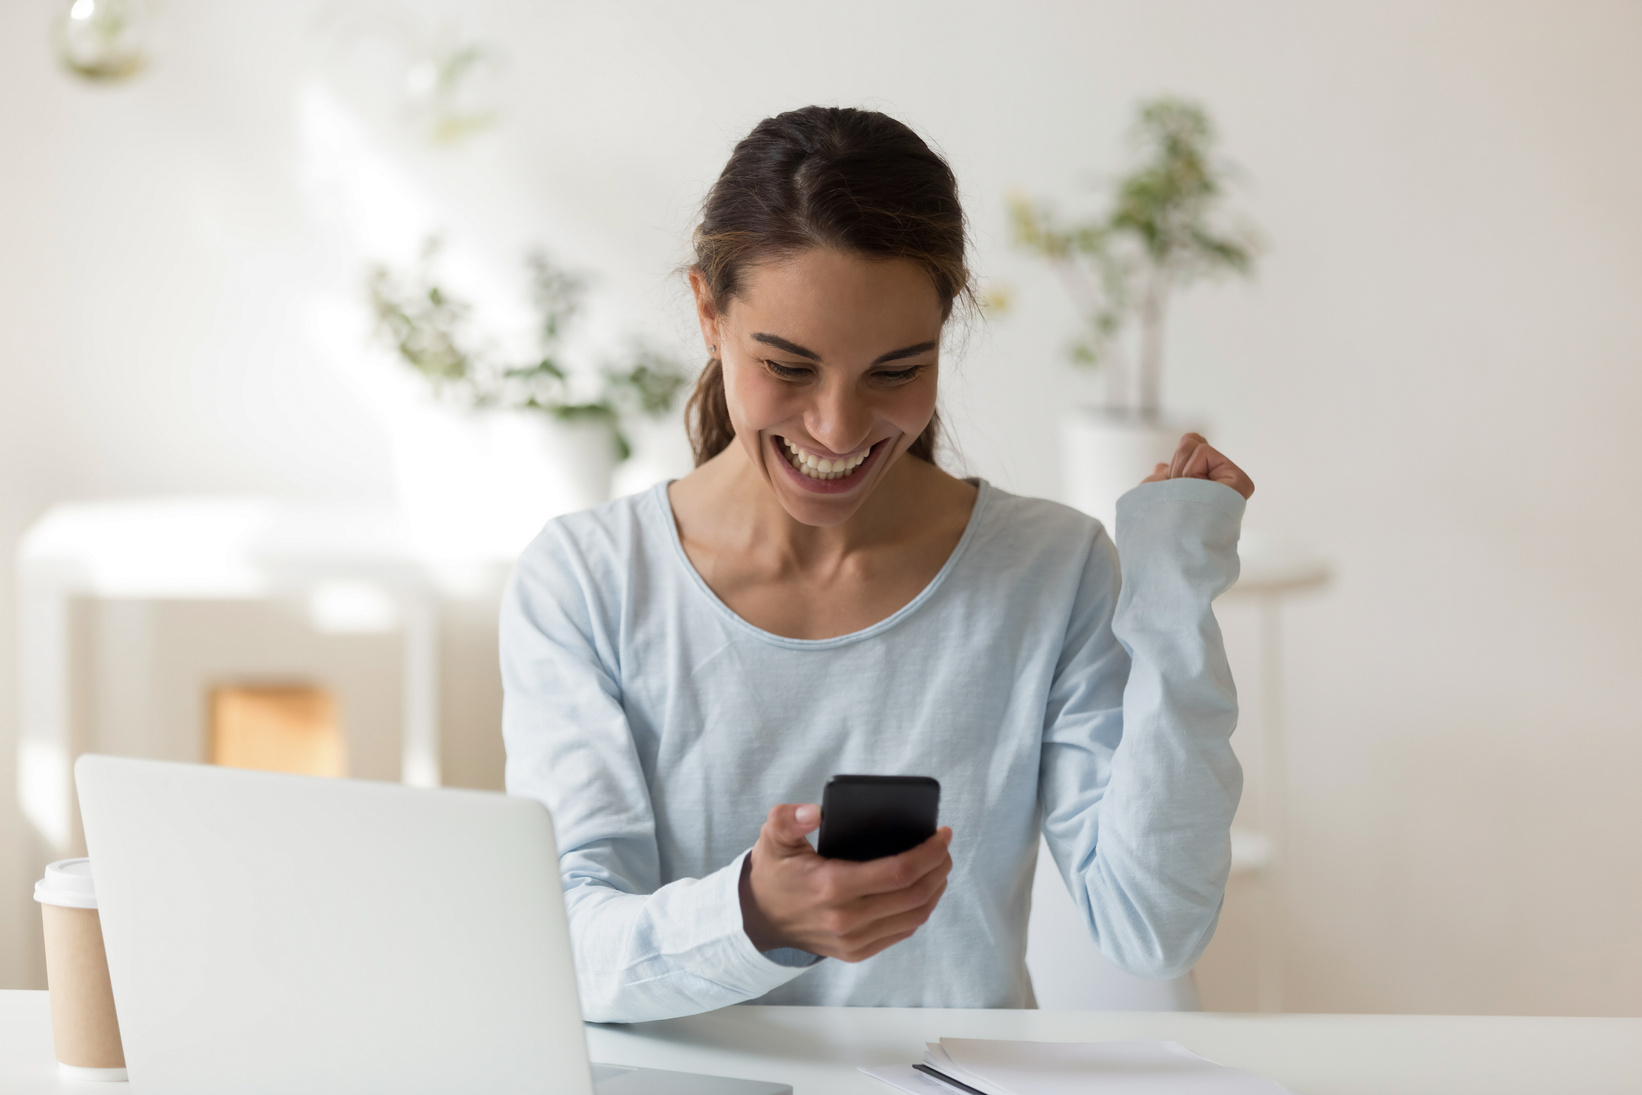 Happy woman looking at phone screen smiling